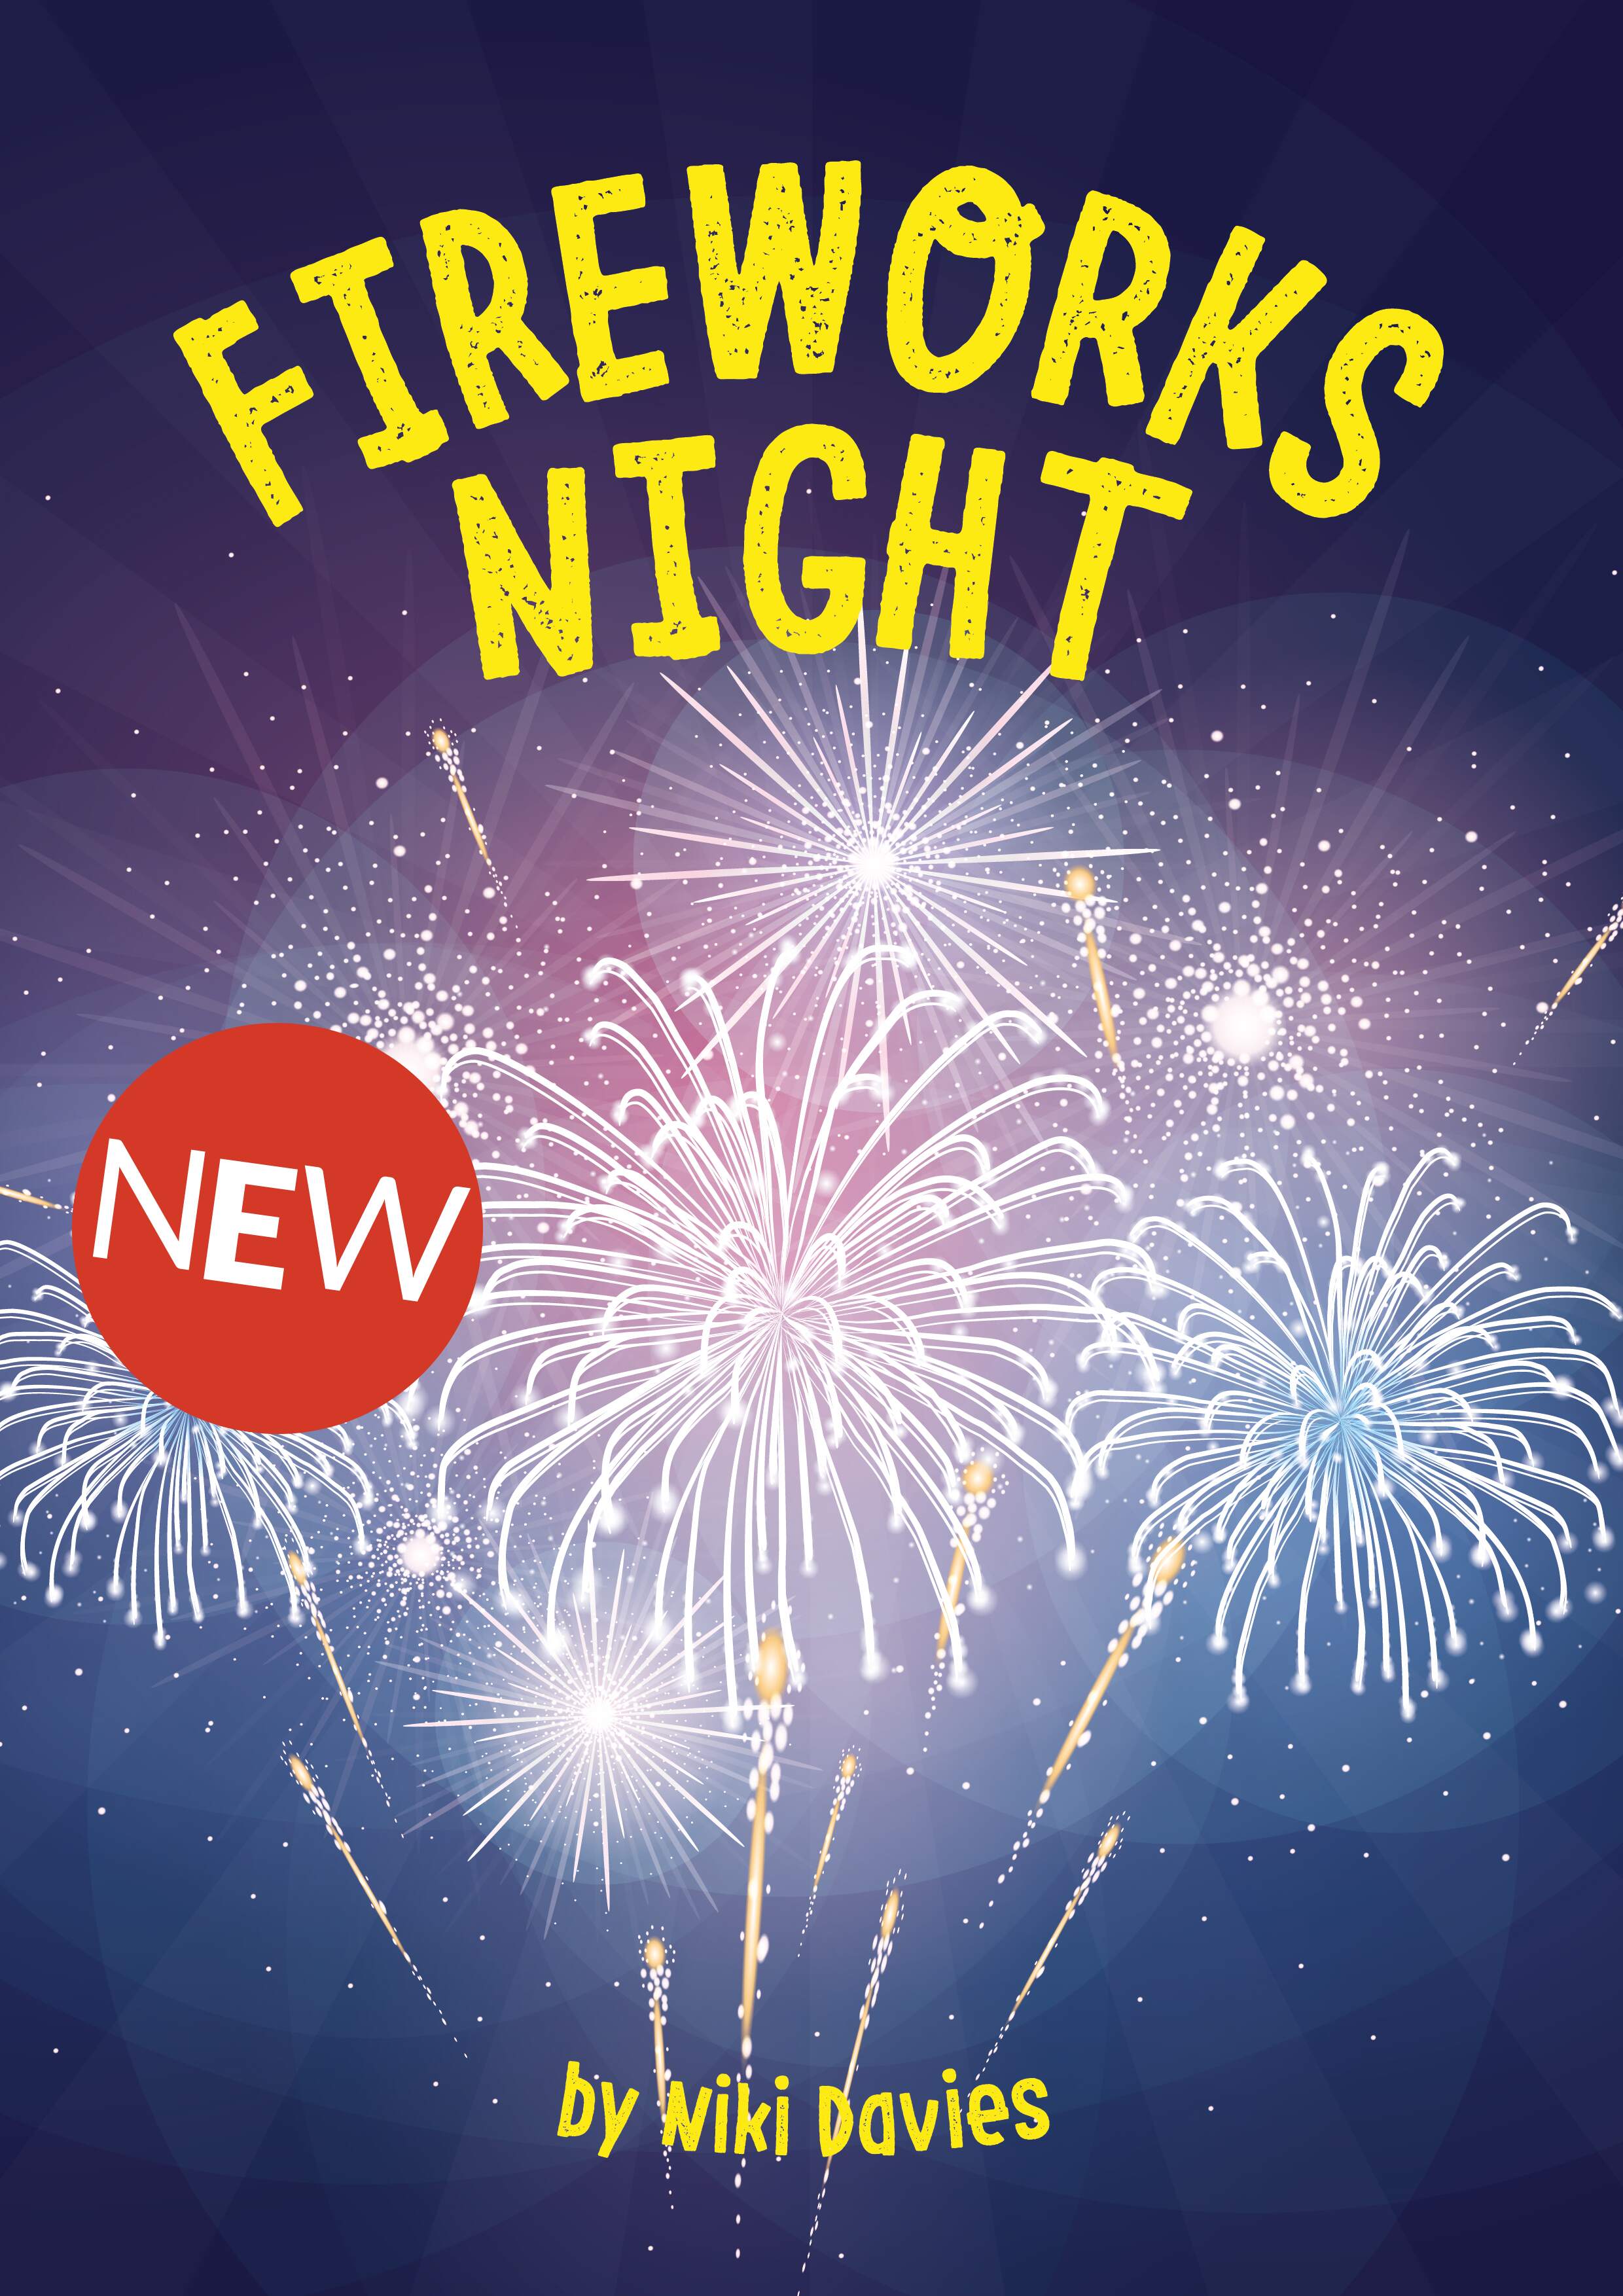 Fireworks Night - Download Pack - Free With Discount Code FIREWORKS